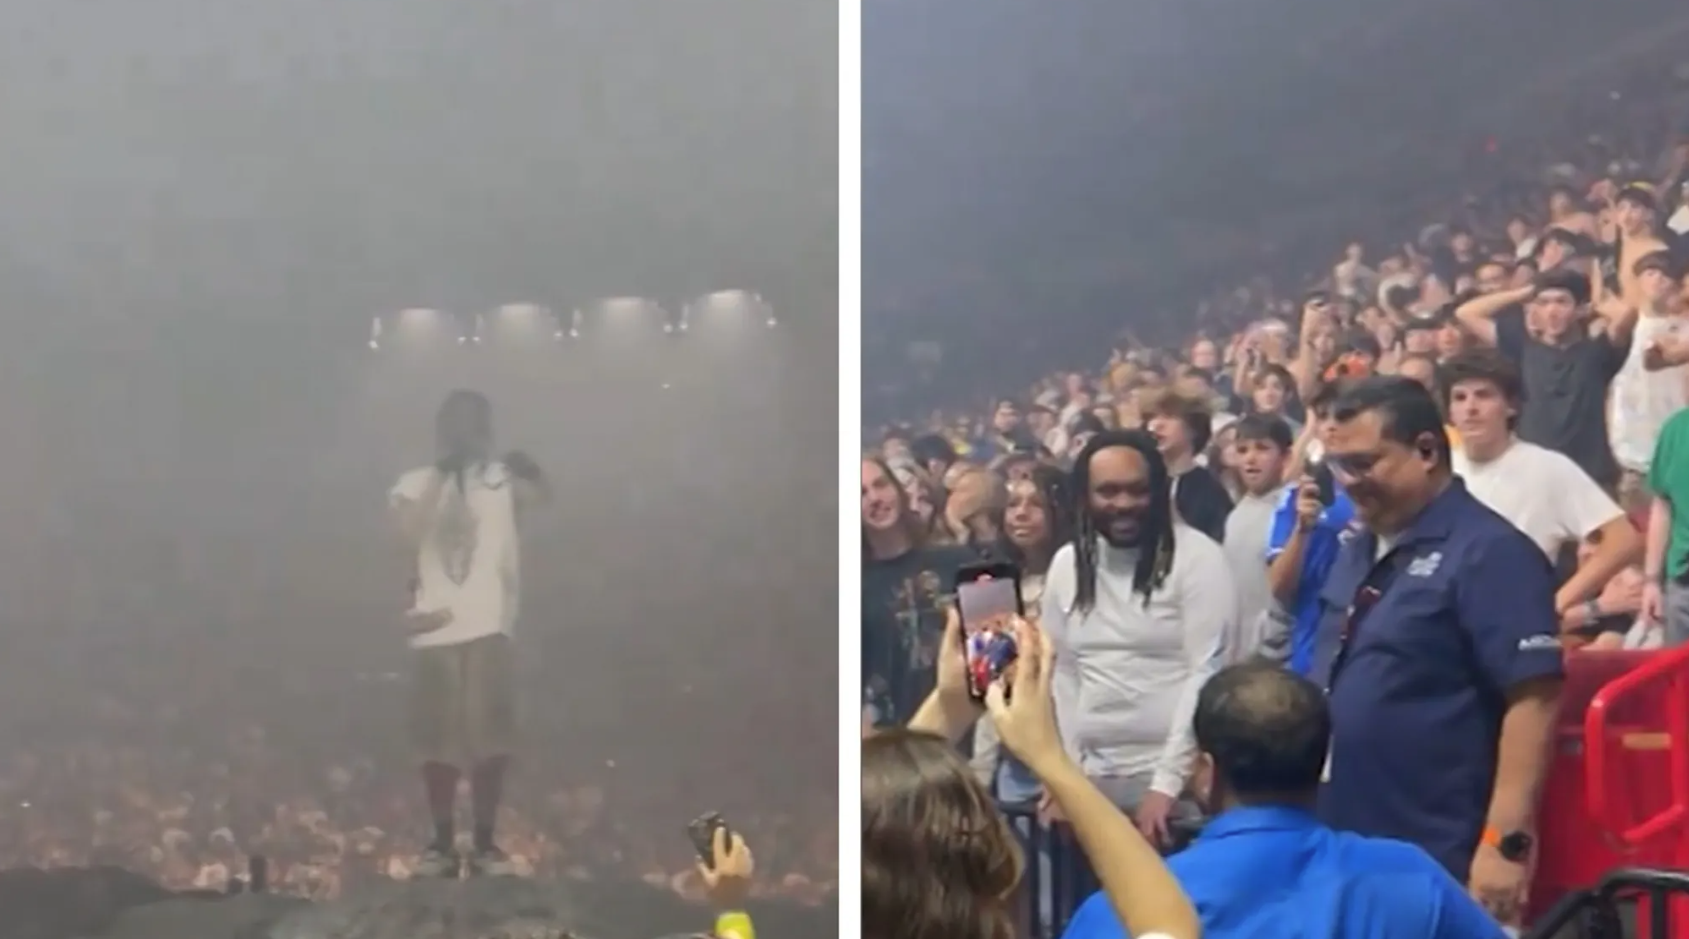 Travis Scott Gives Stadium Janitor $5,000 to Take Night Off and Enjoy Concert